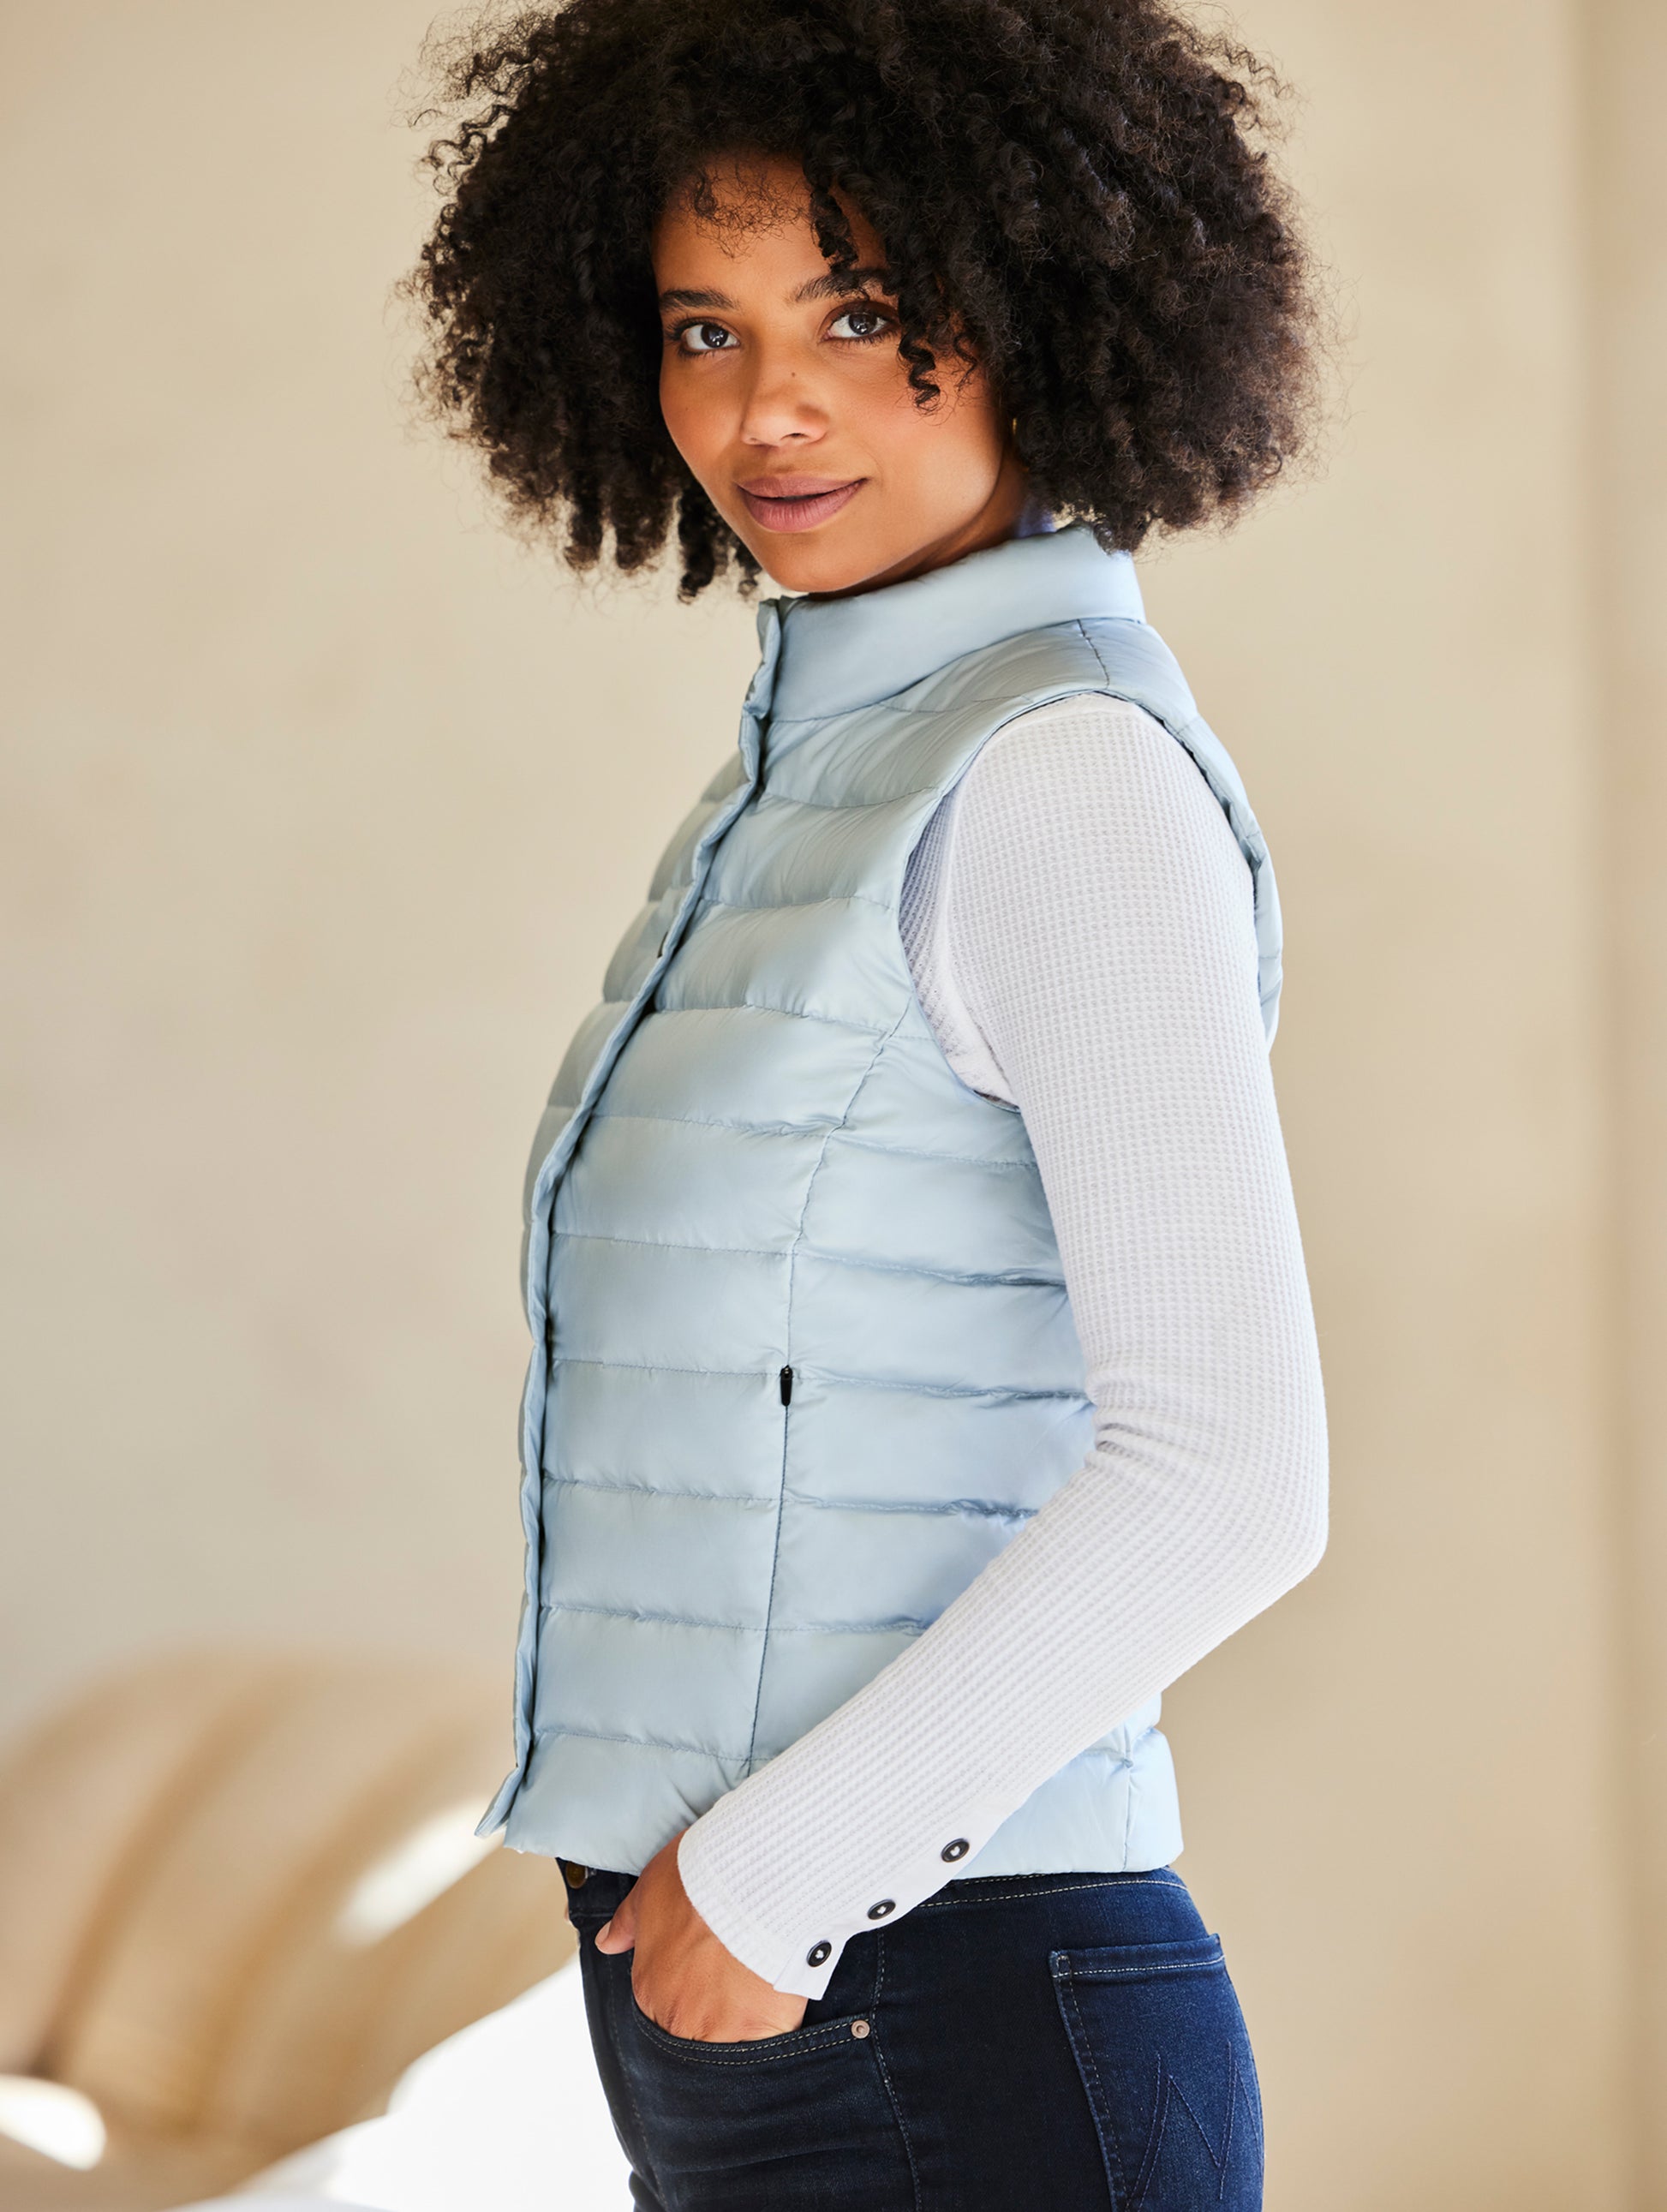 woman wearing blue vest from AETHER Apparel